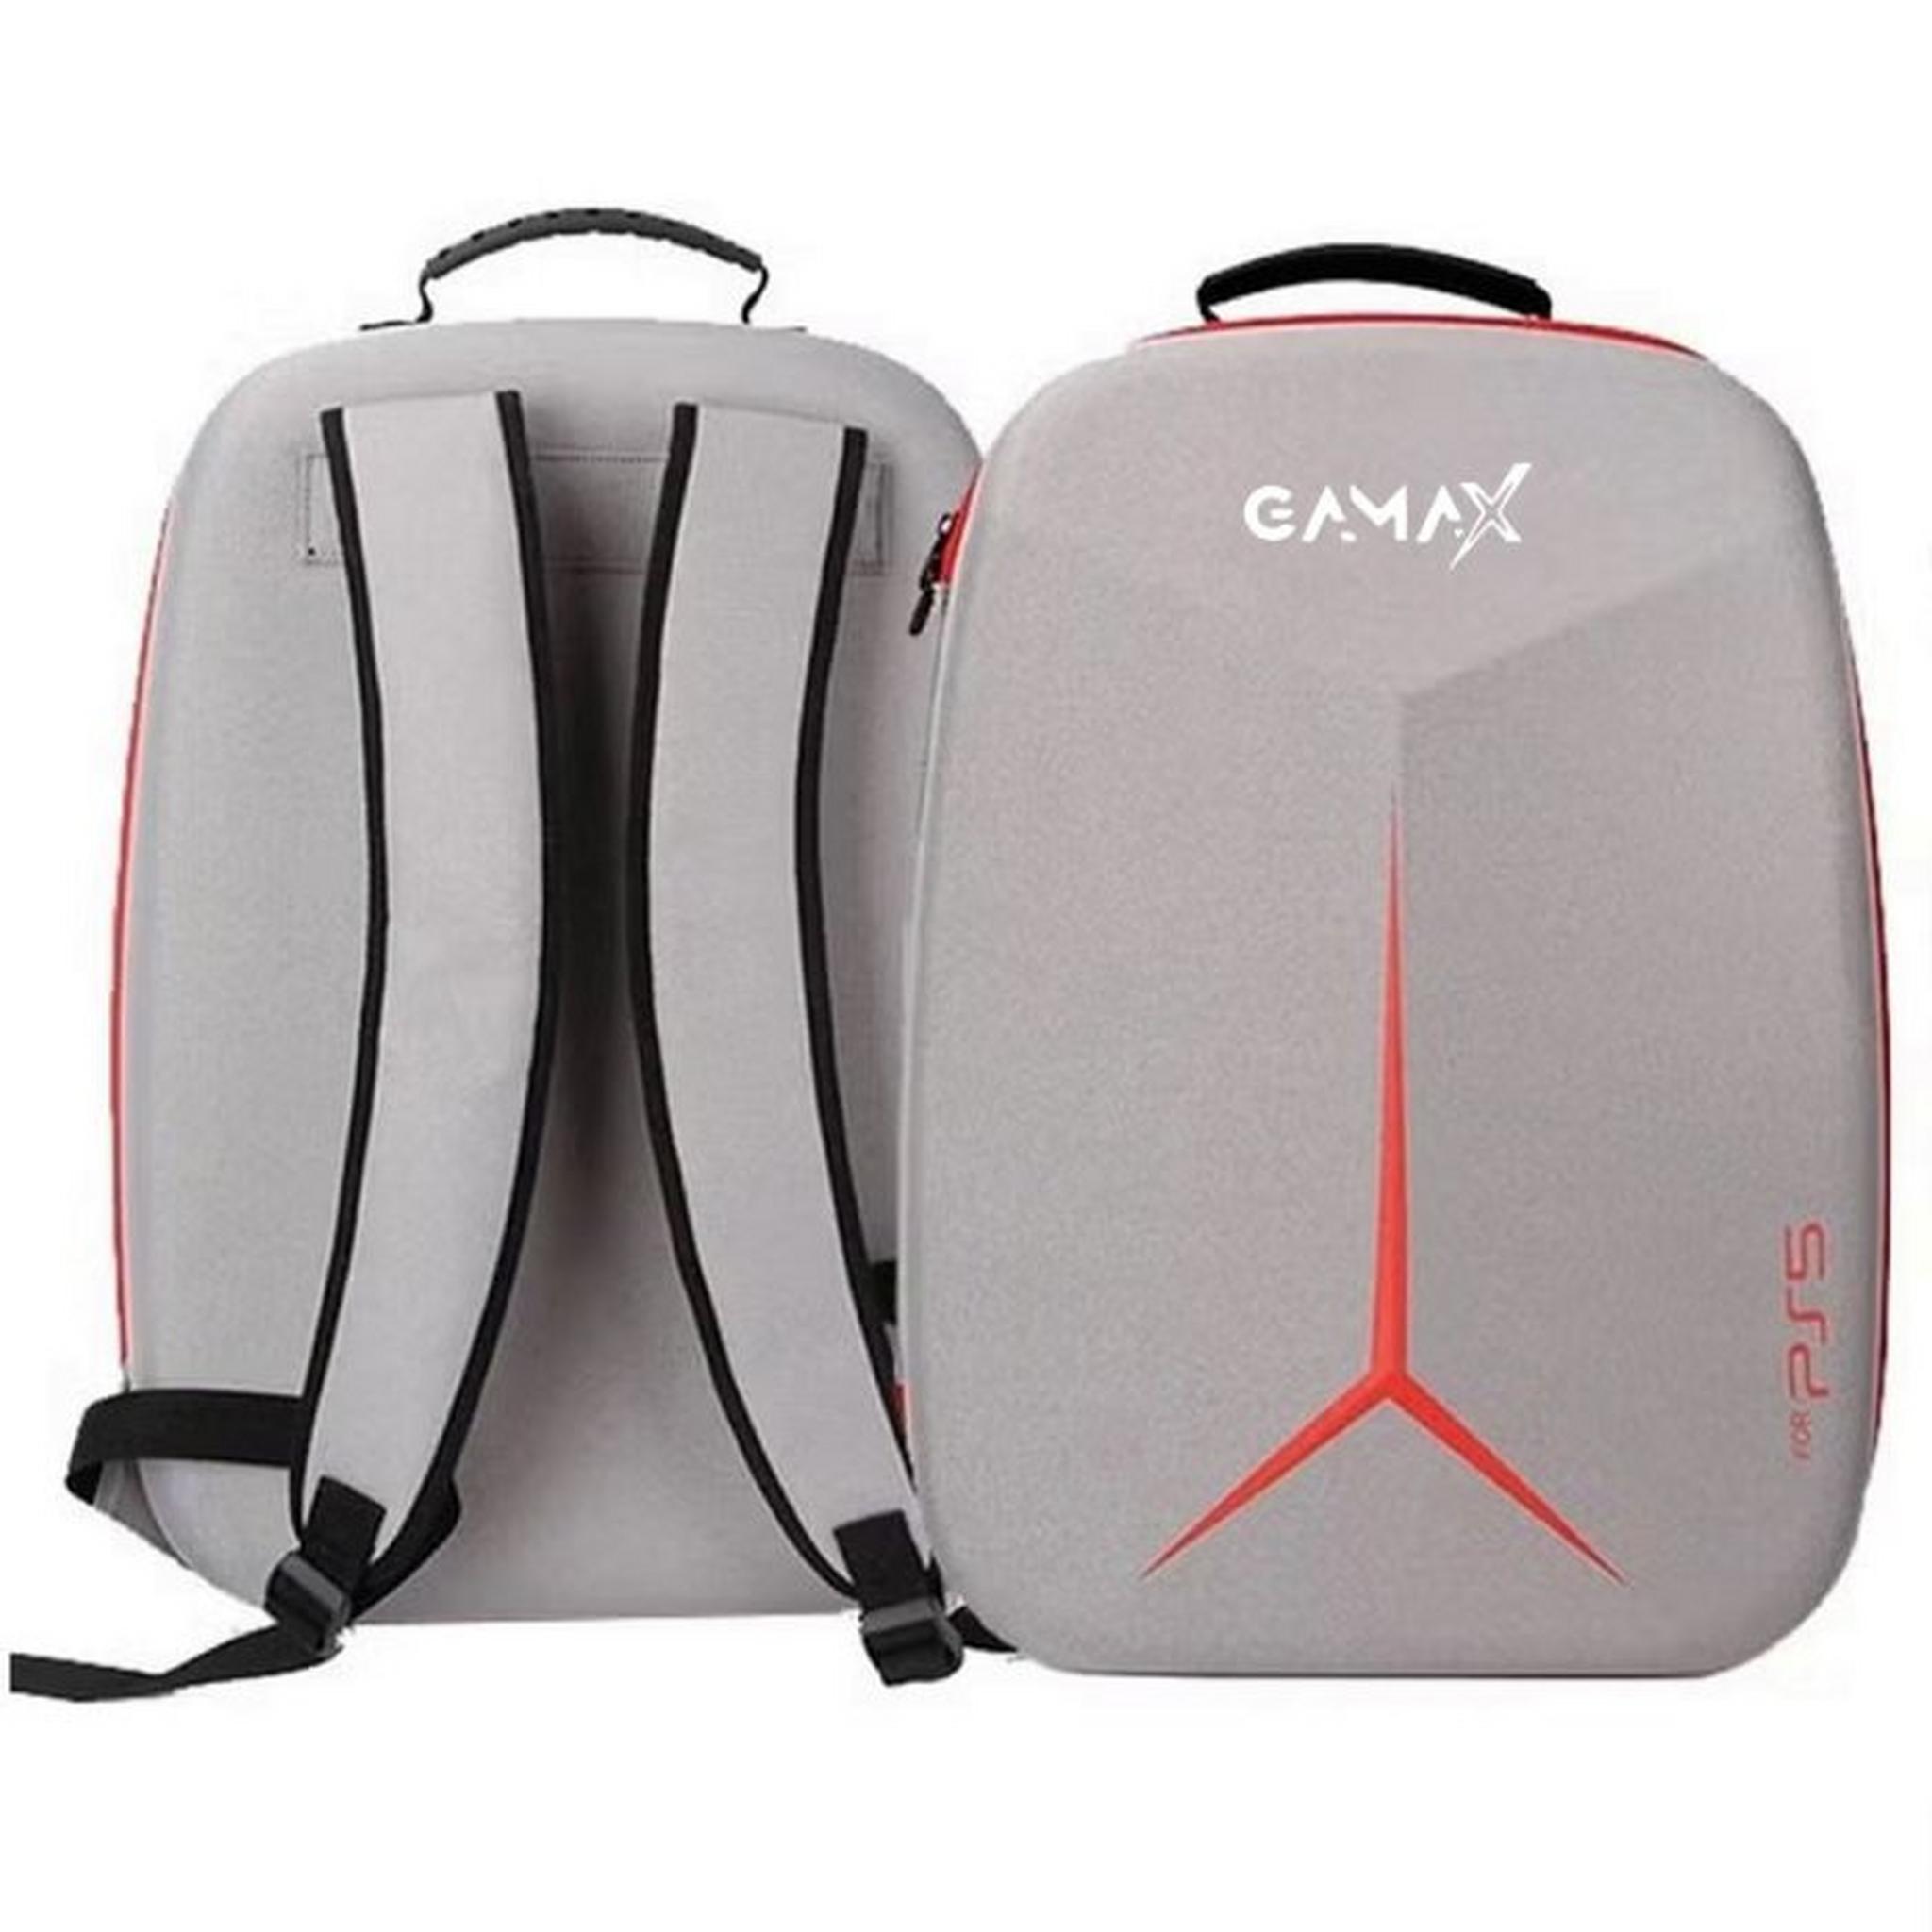 Gamax Storage Backpack for PlayStation 5 - Gray